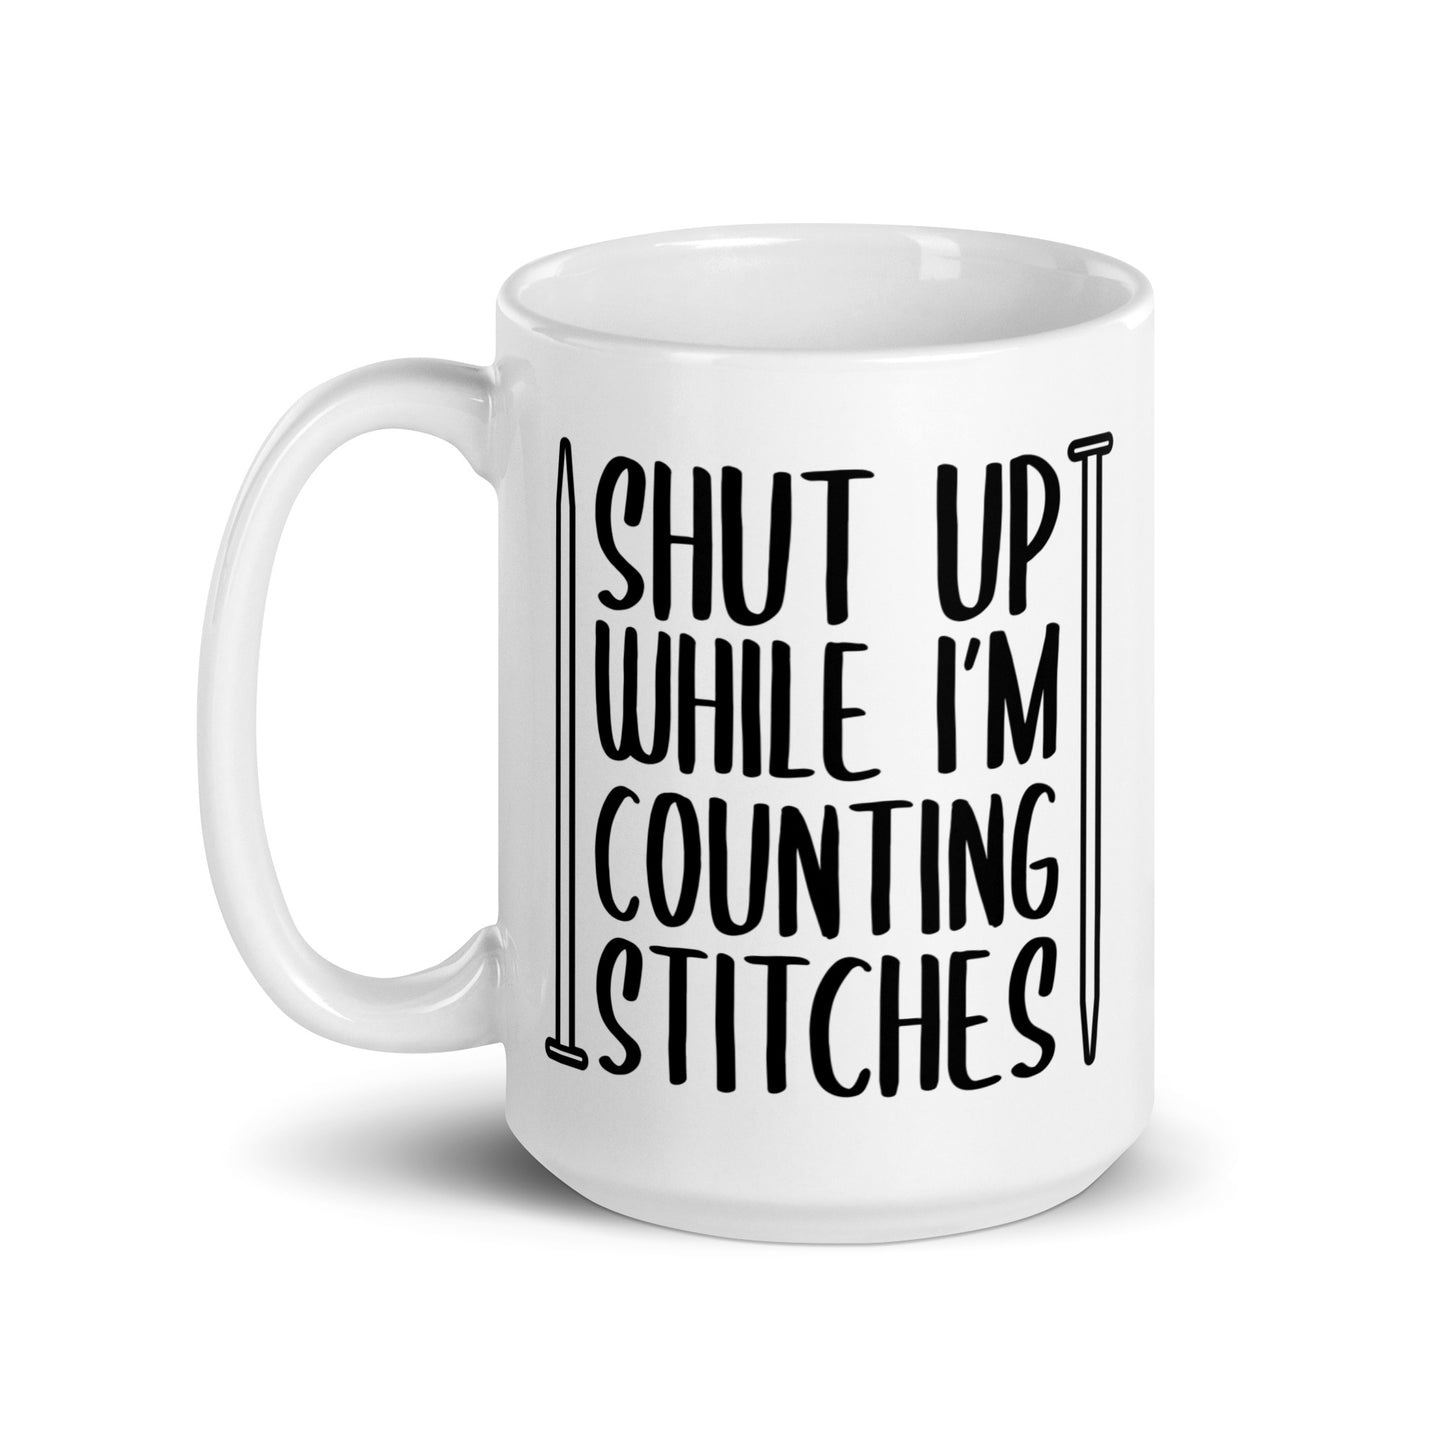 A white 15 ounce ceramic mug with black text surrounded by two knitting needles. The text reads "Shut up while I'm counting stiches".